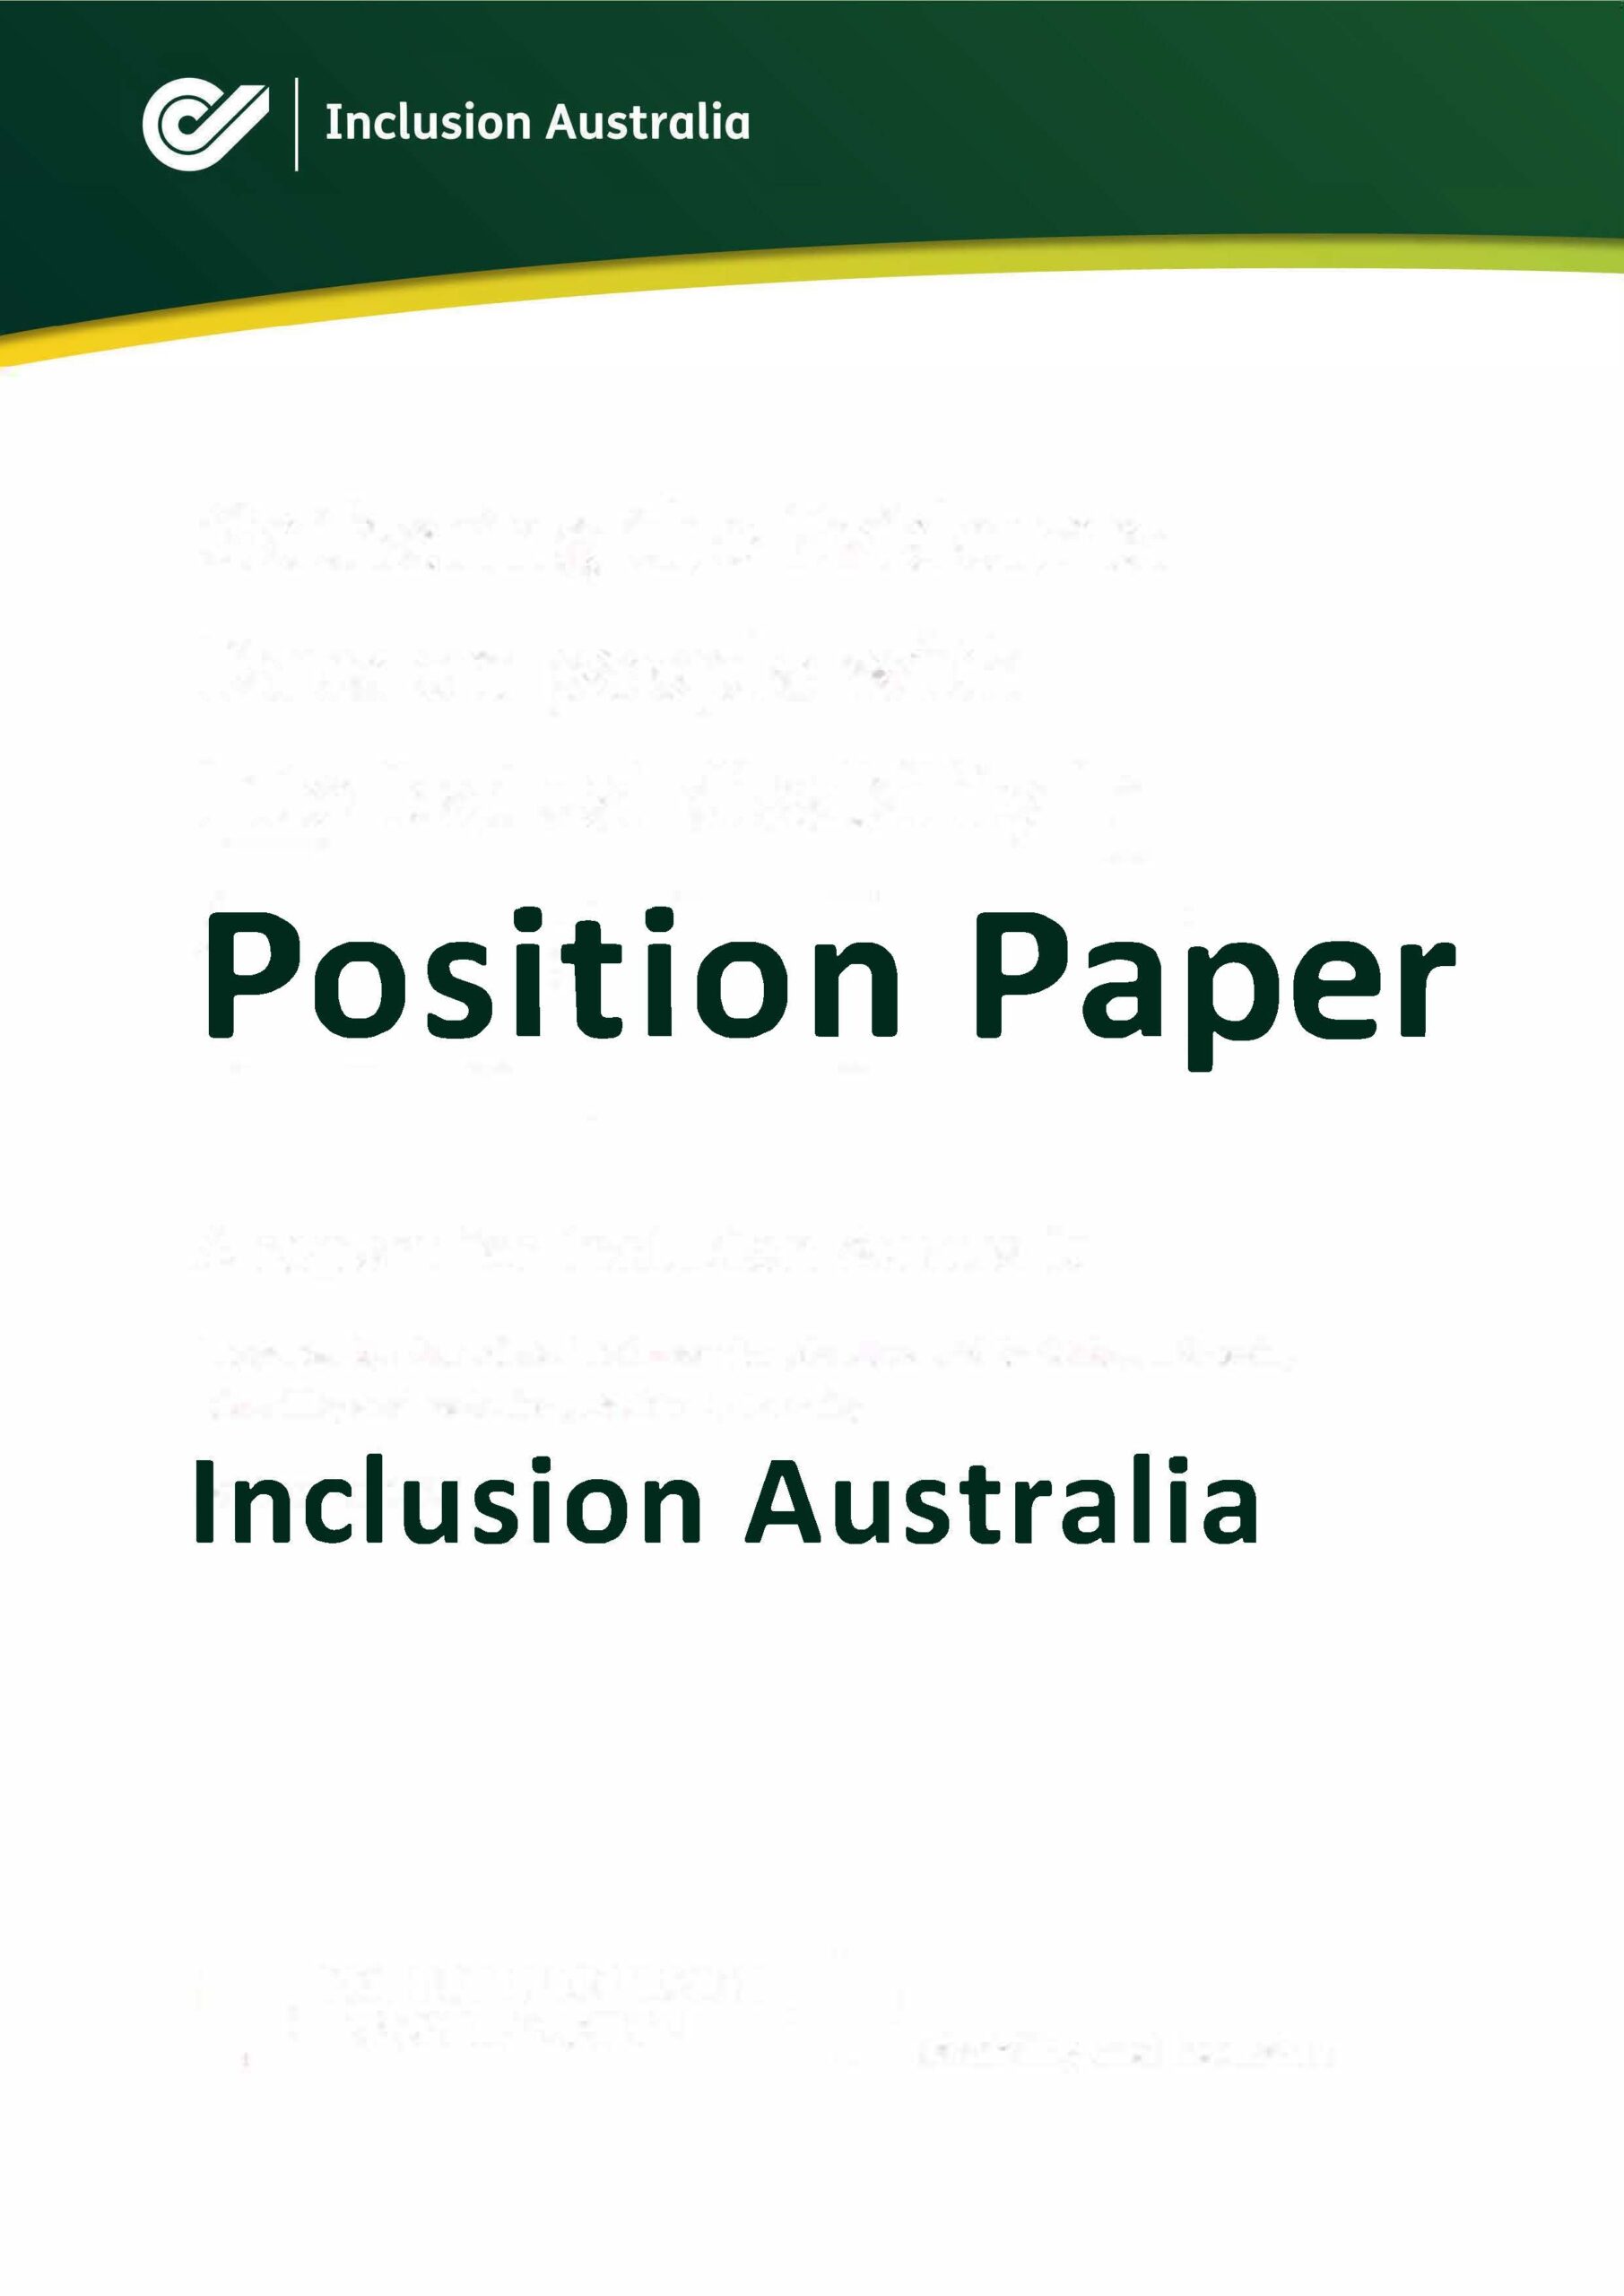 An image of the front cover of a report with the words "position paper Inclusion Australia"